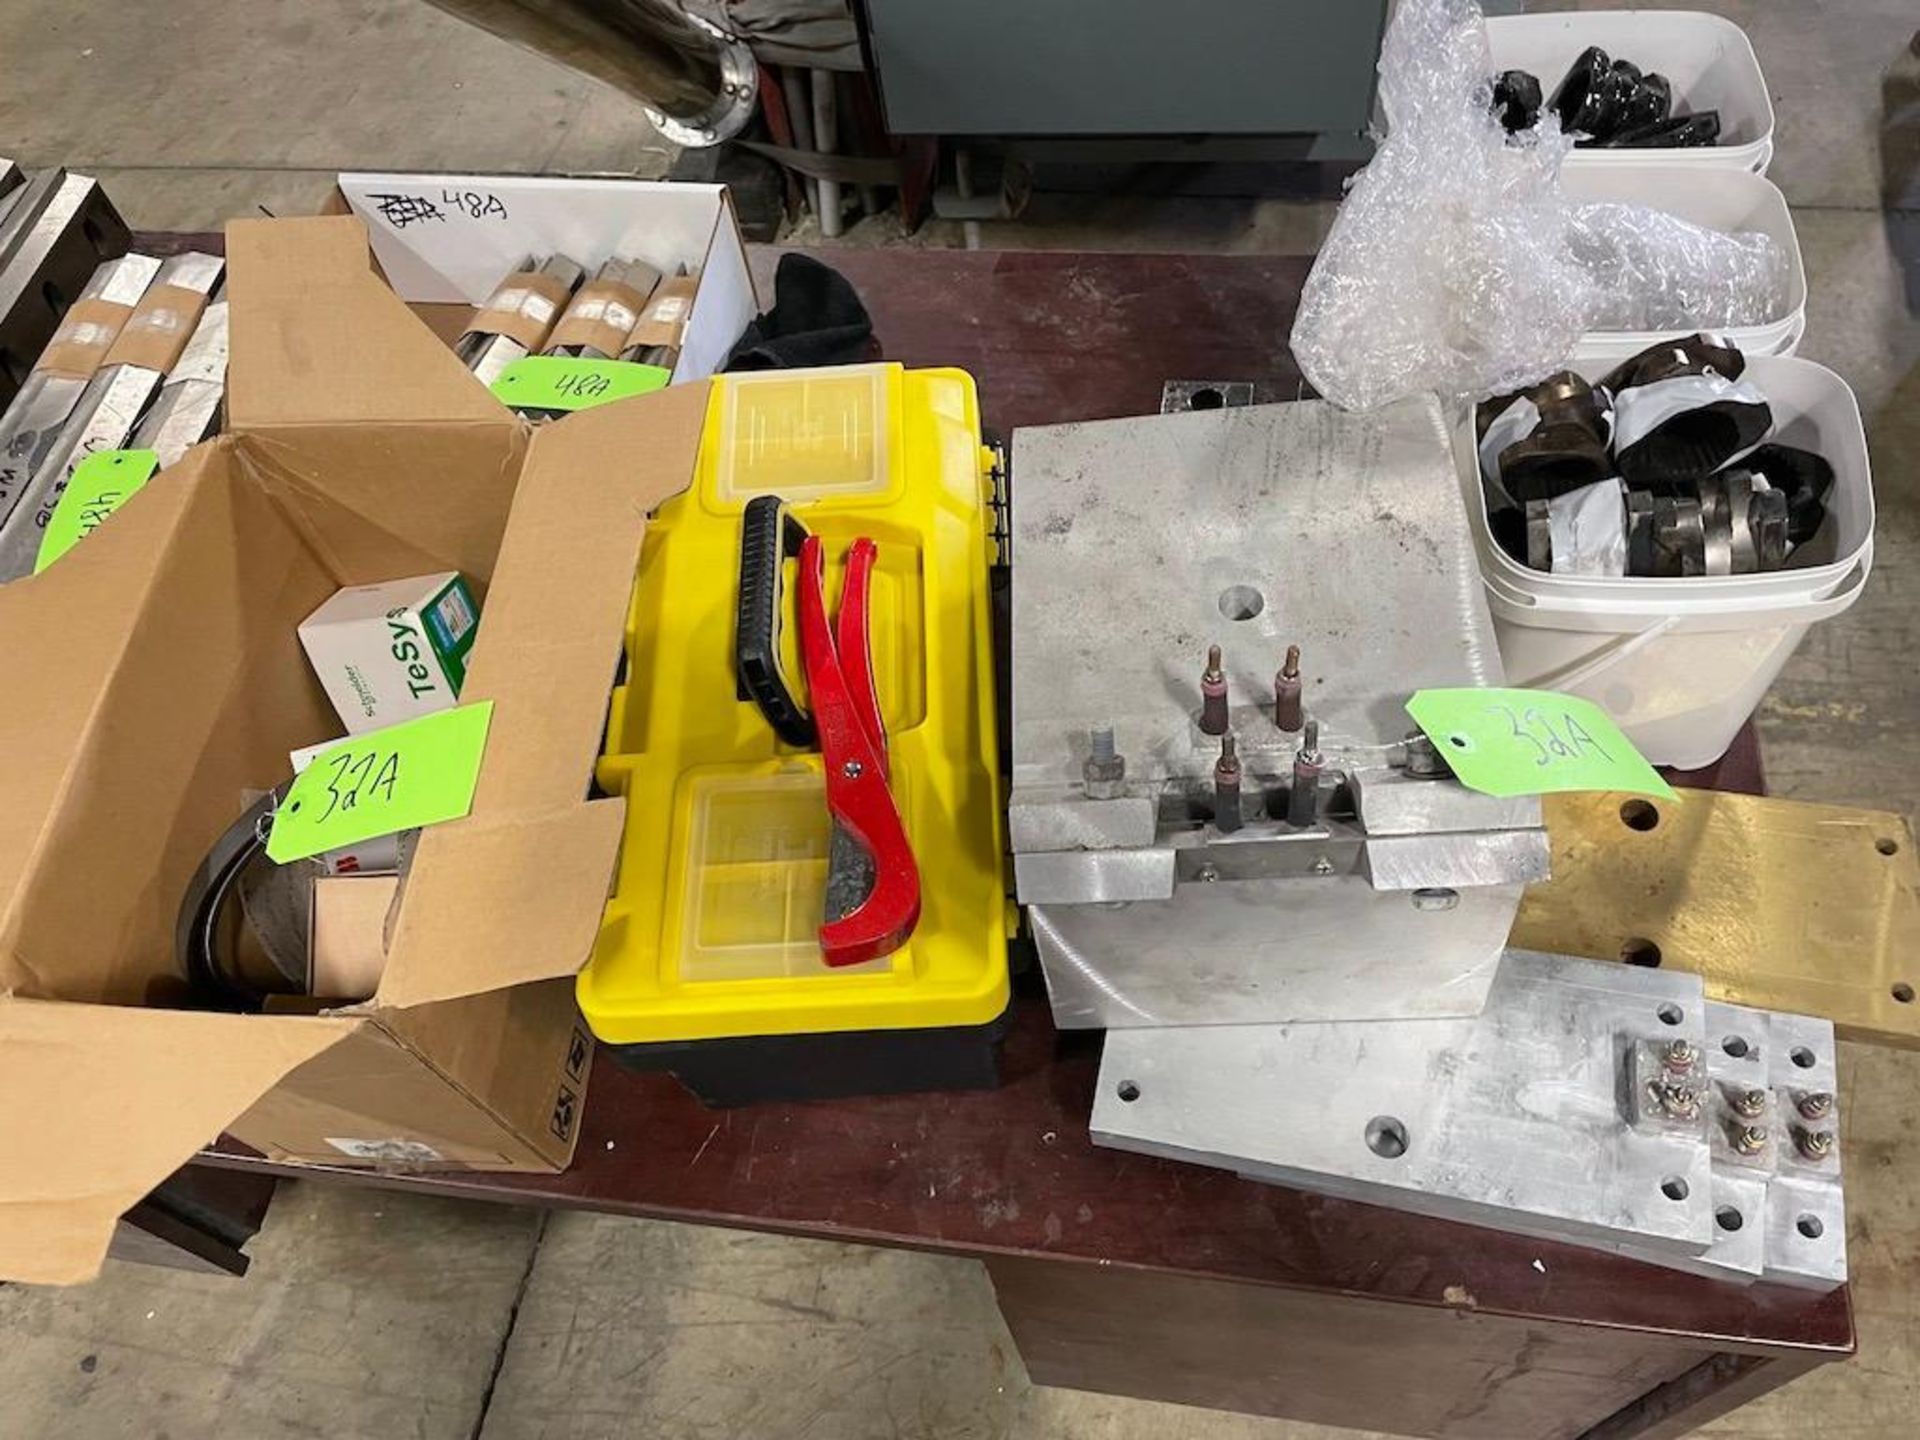 Parts including: meters, seals, electrical connectors, toolbox with meters, heater components, twin